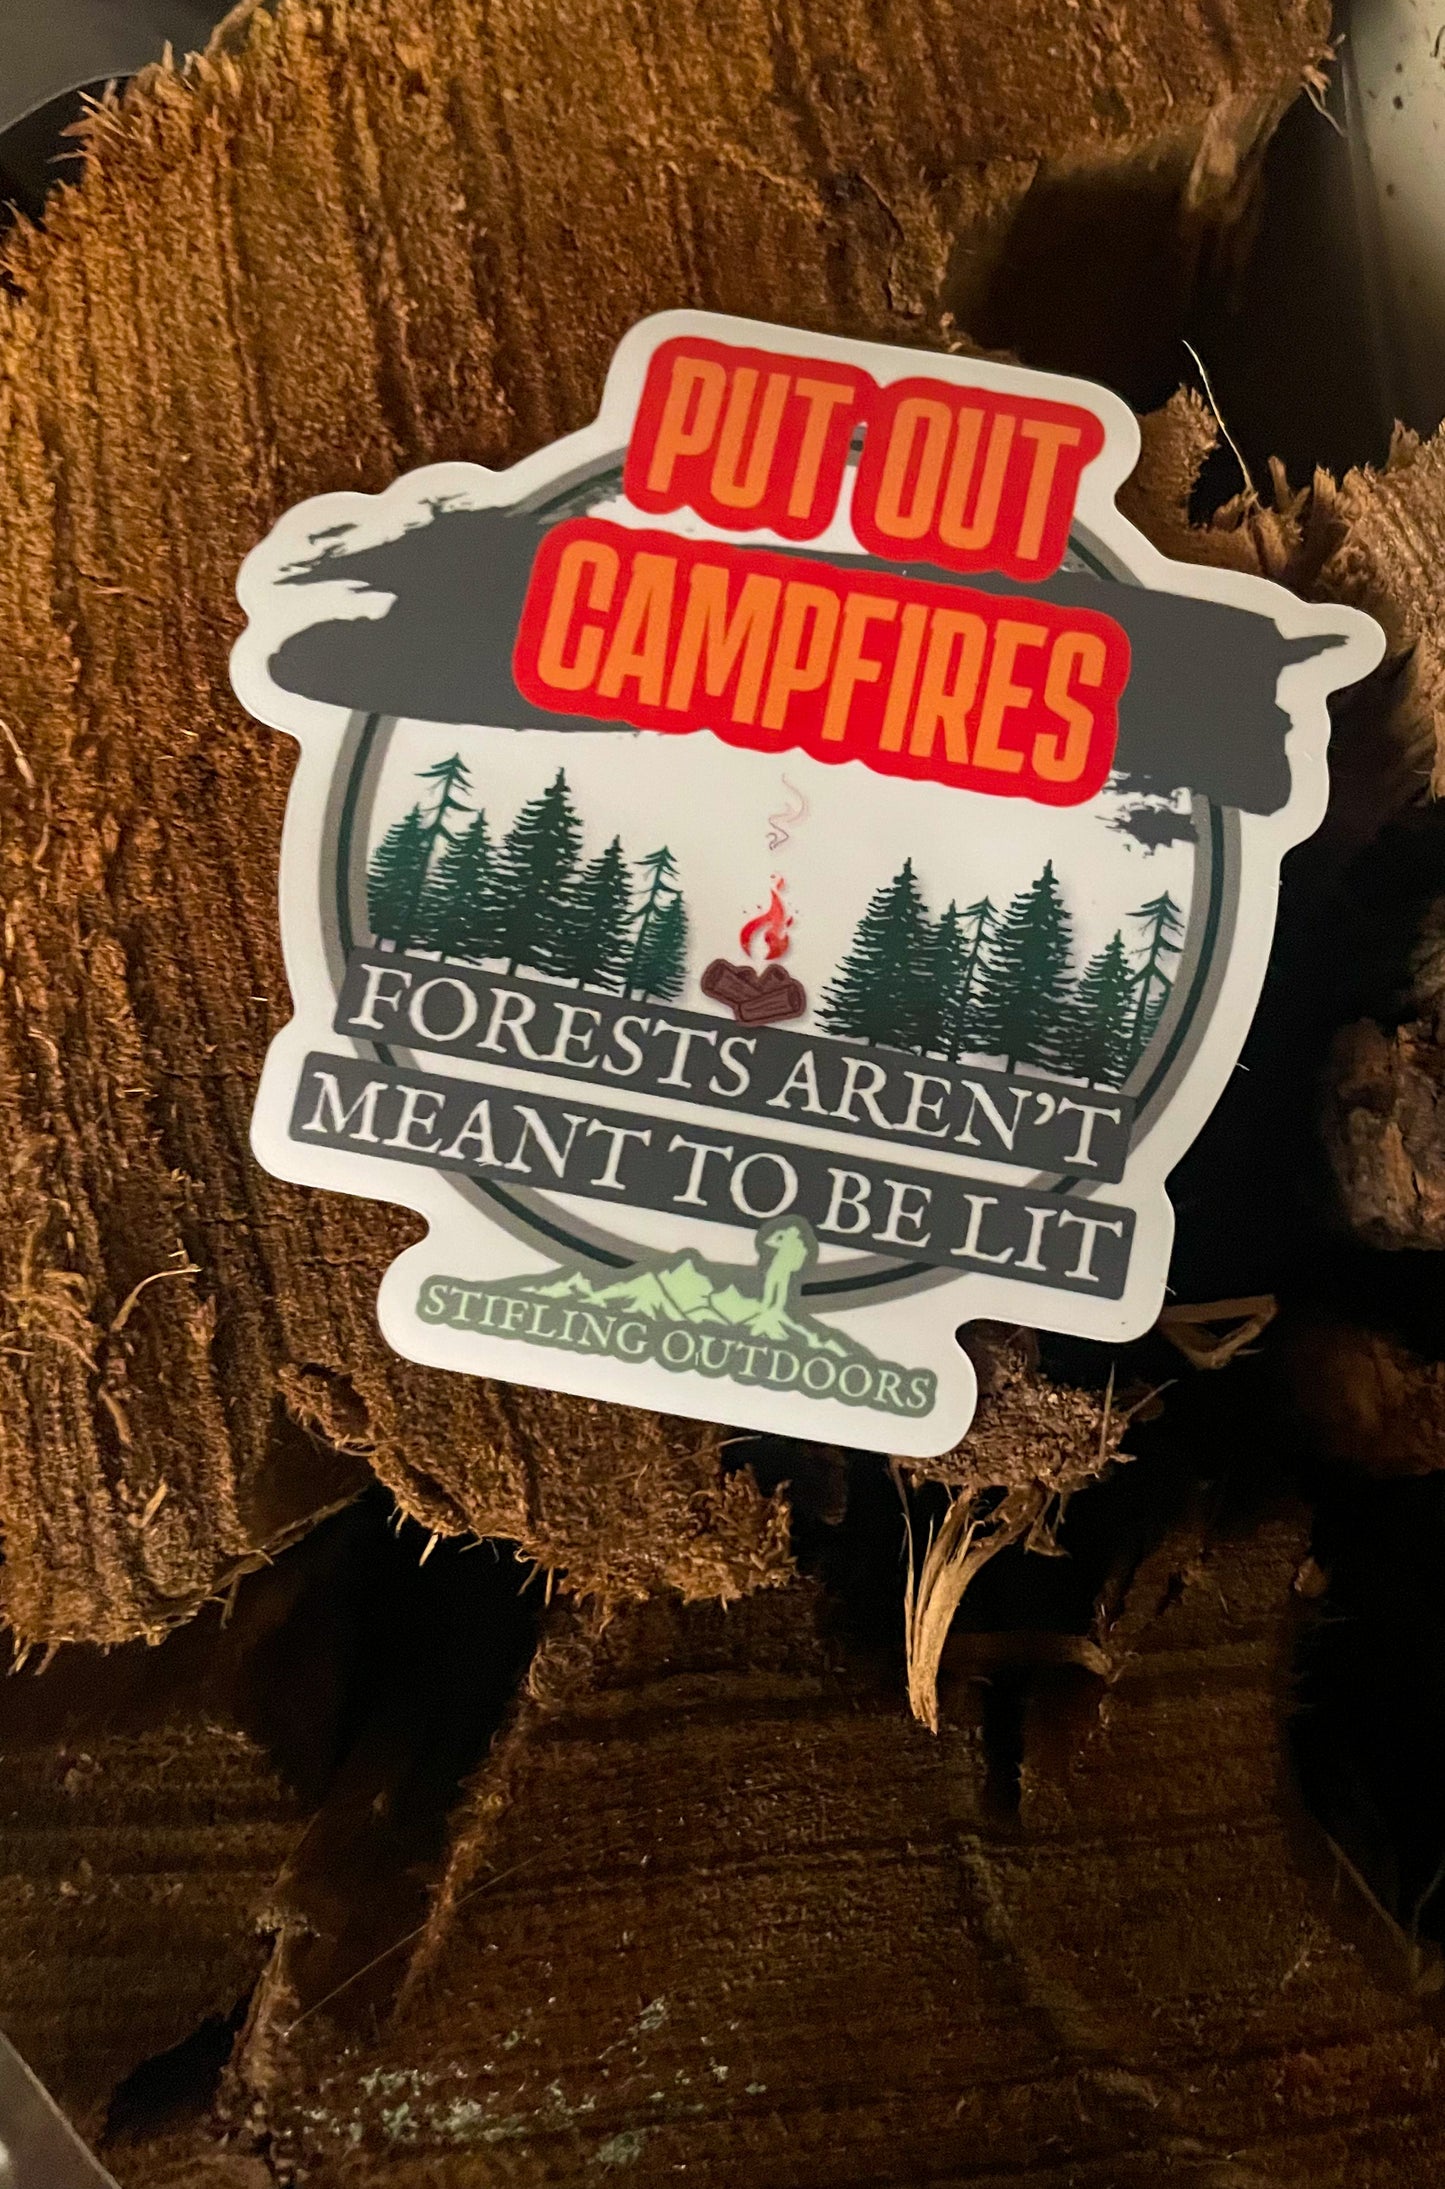 "Forests Aren’t Meant to Be Lit" Sticker